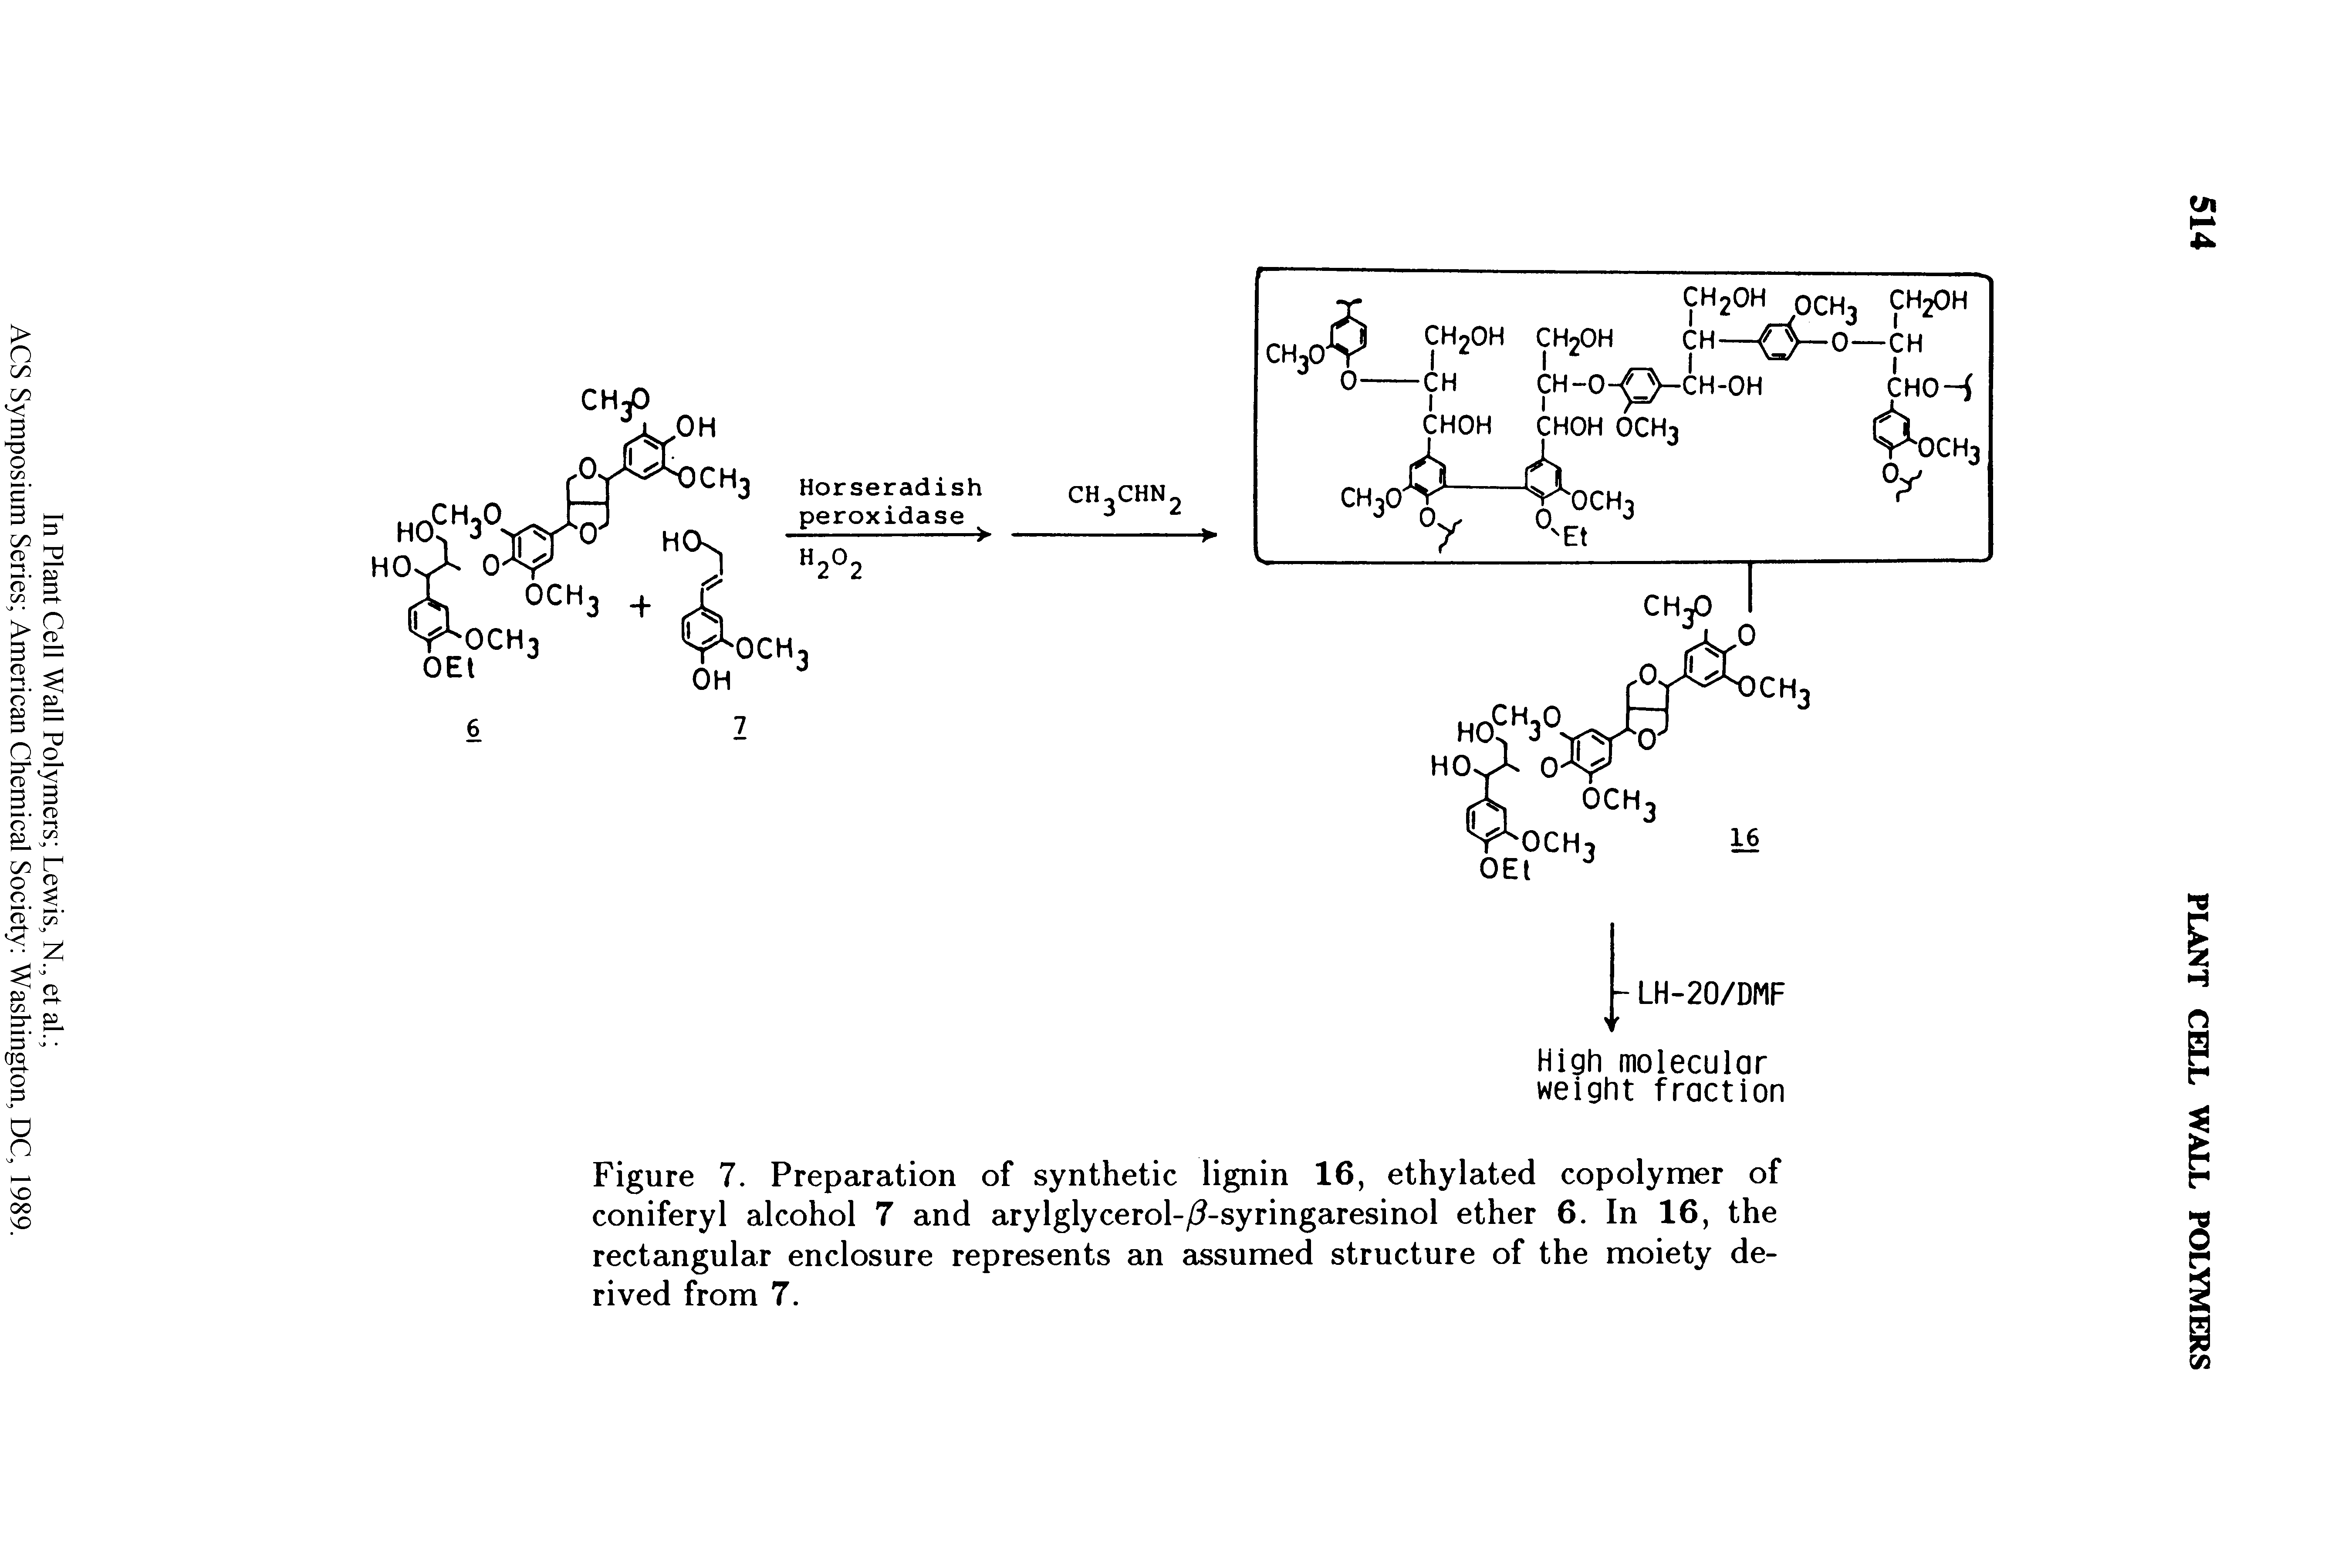 Figure 7. Preparation of synthetic lignin 16, ethylated copolymer of coniferyl alcohol 7 and arylglycerol-/ -syringaresinol ether 6. In 16, the rectangular enclosure represents an assumed structure of the moiety derived from 7.